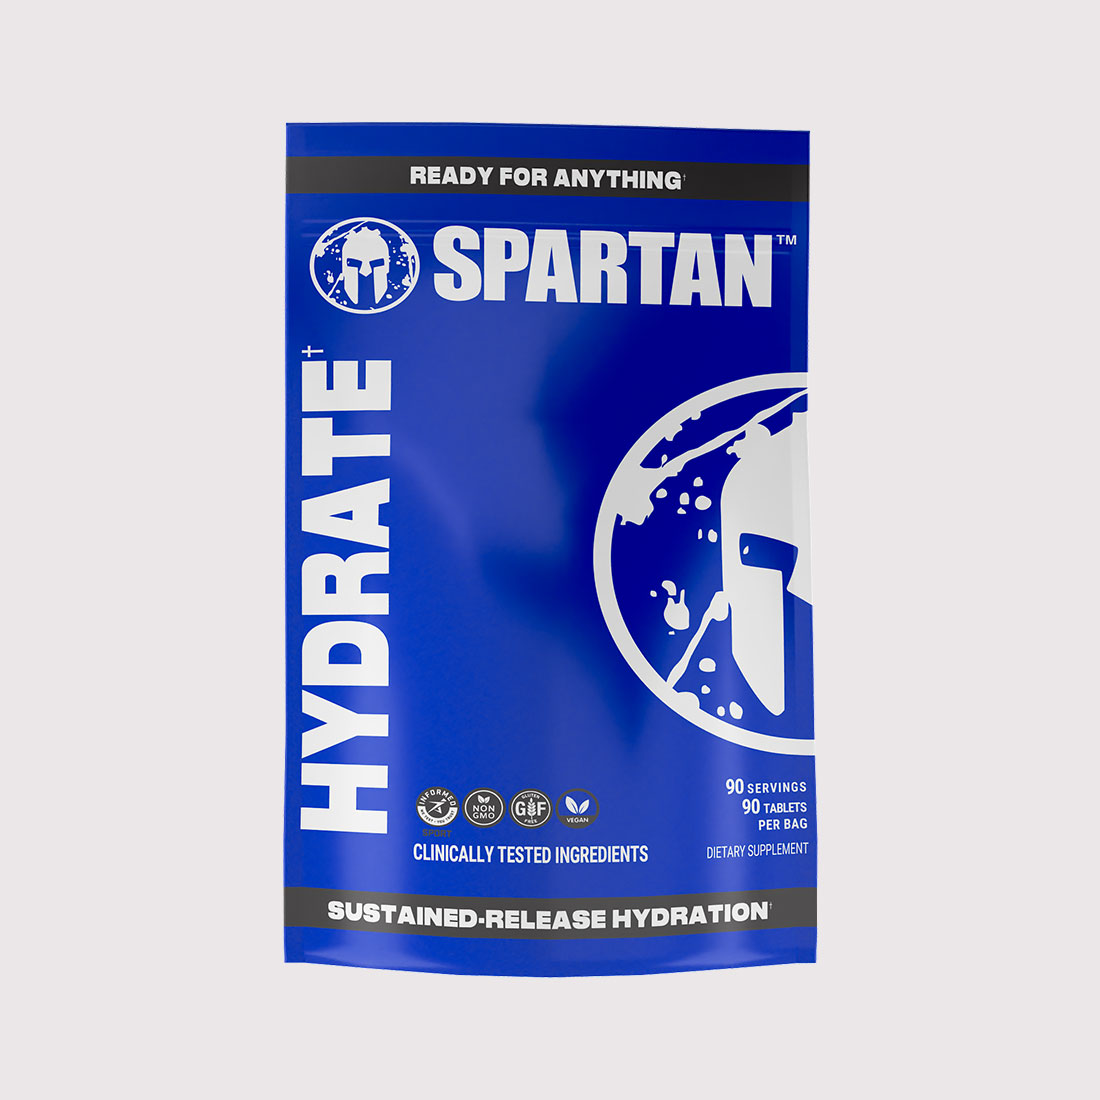 Spartan Hydrate Tablets